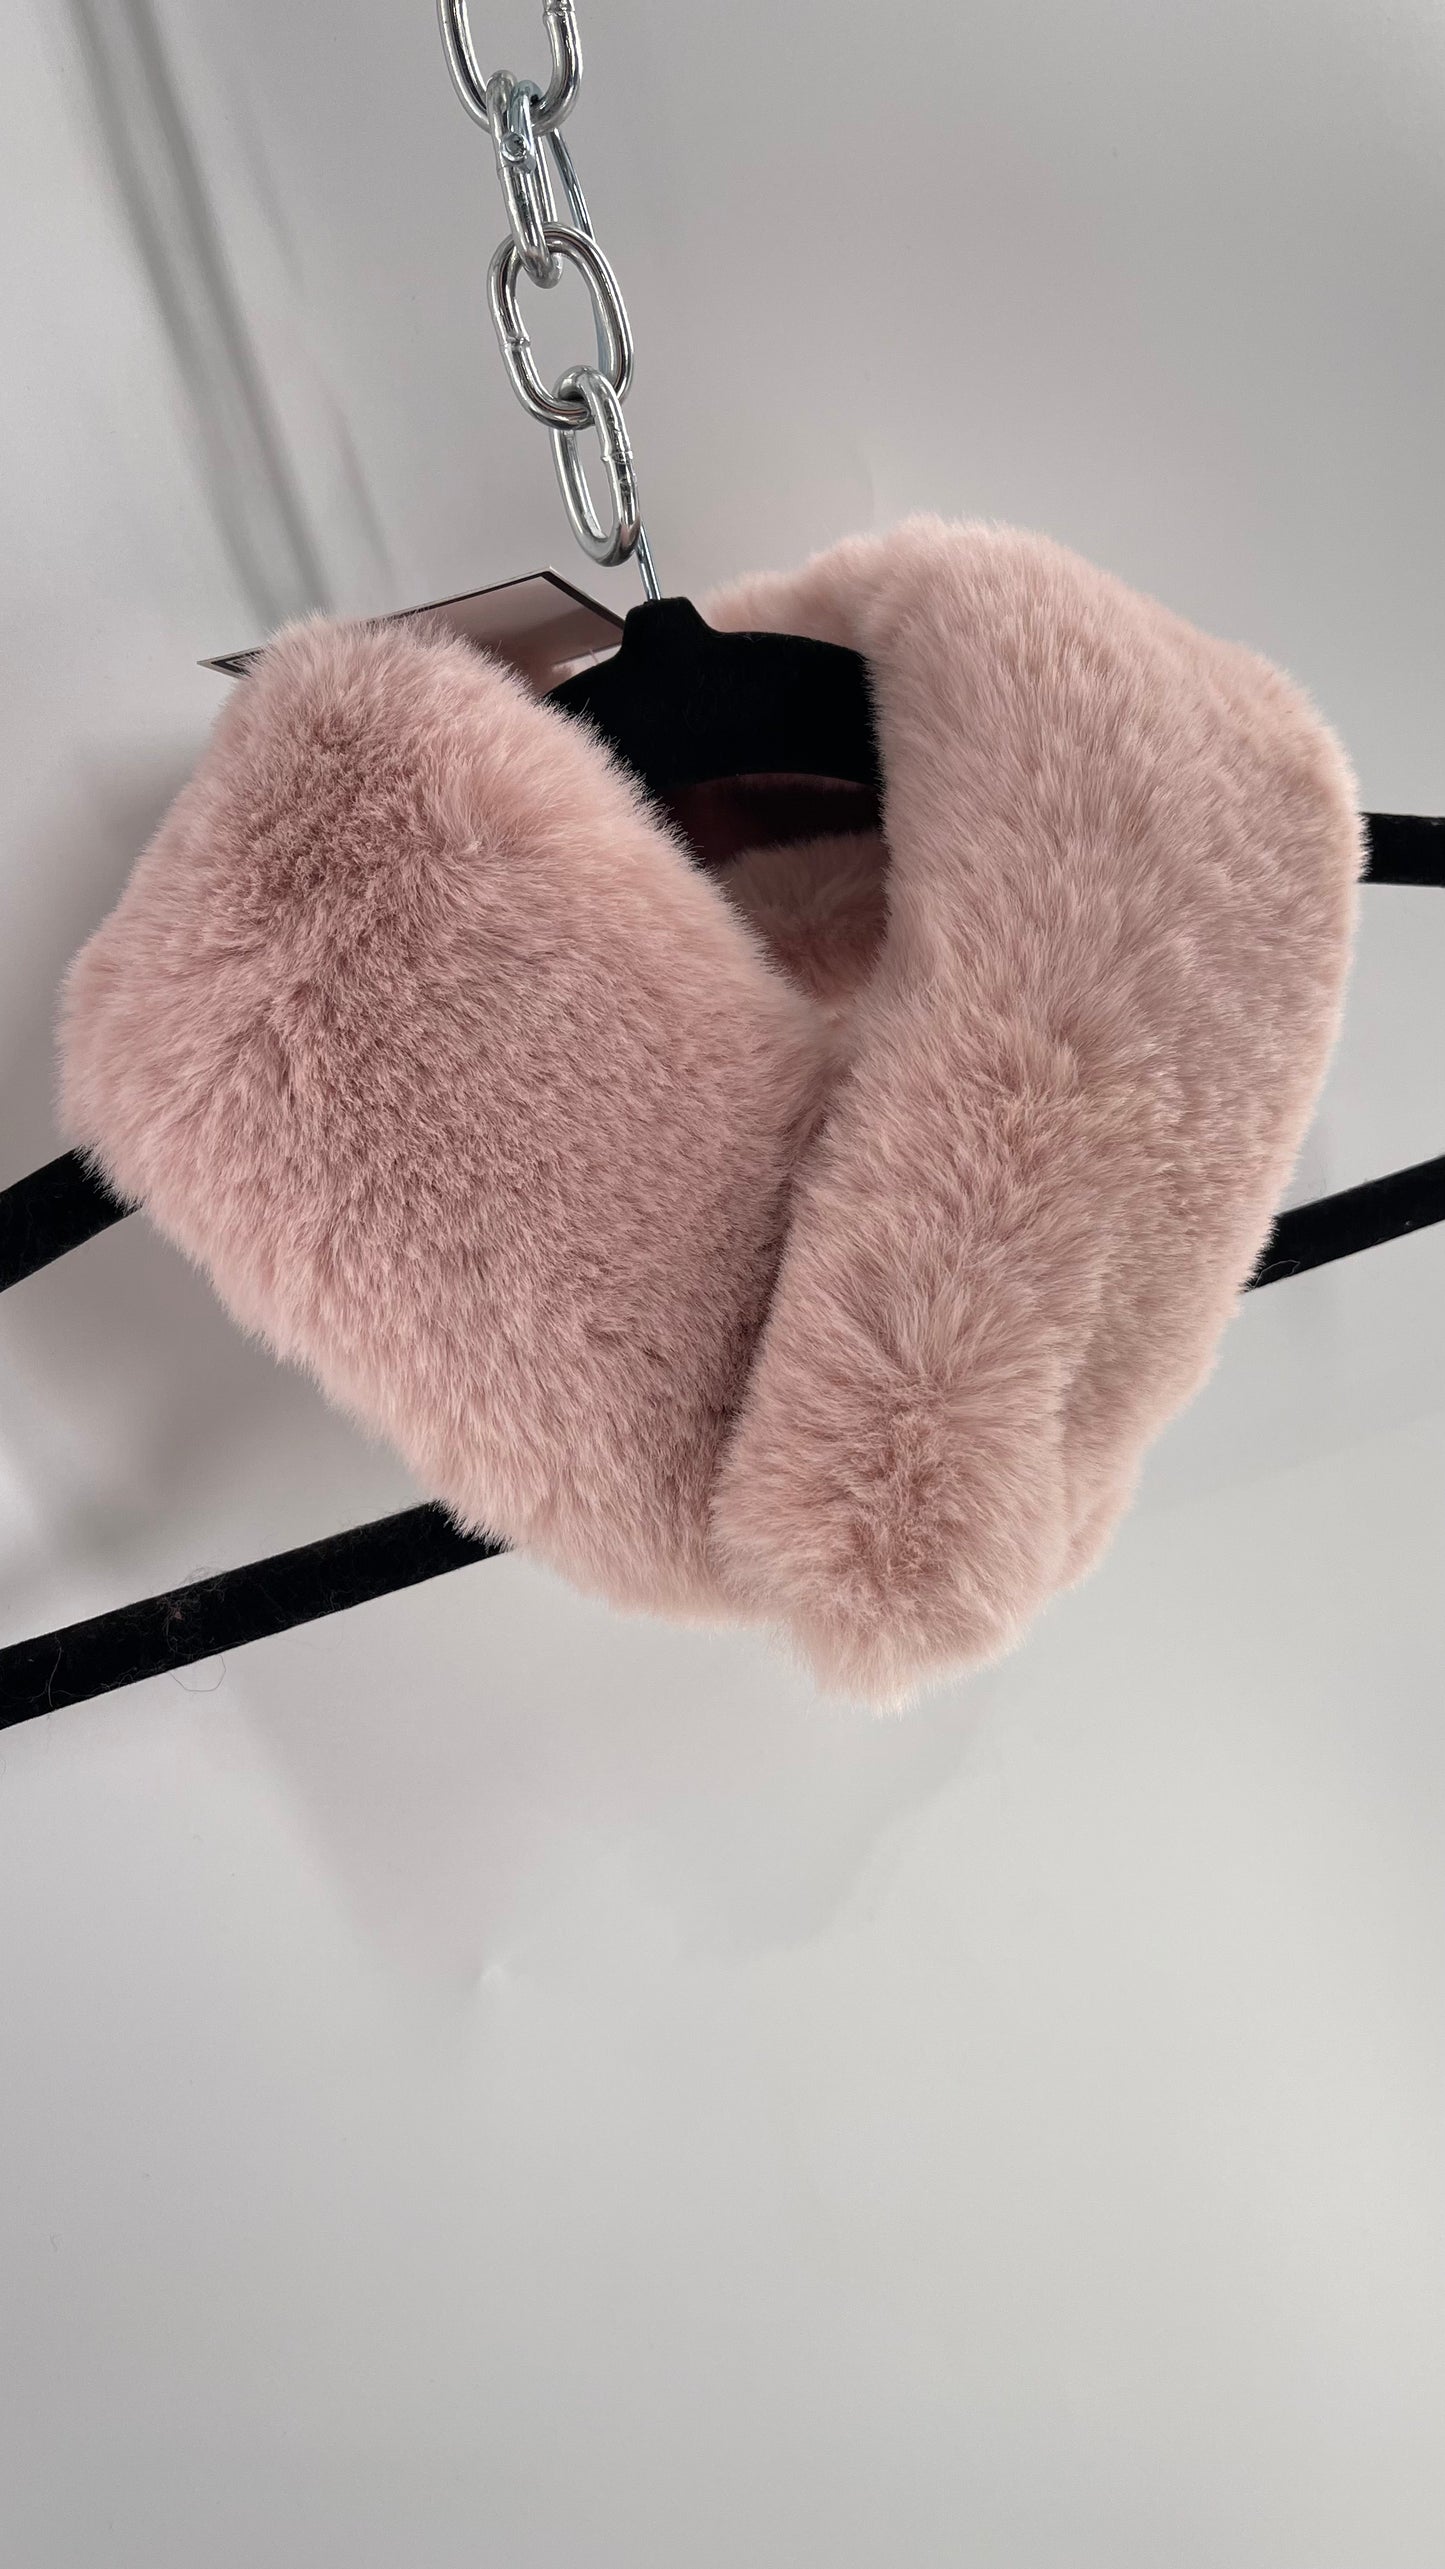 Muted Pink Fur Collar/Neck Warmer with Velvet Lining